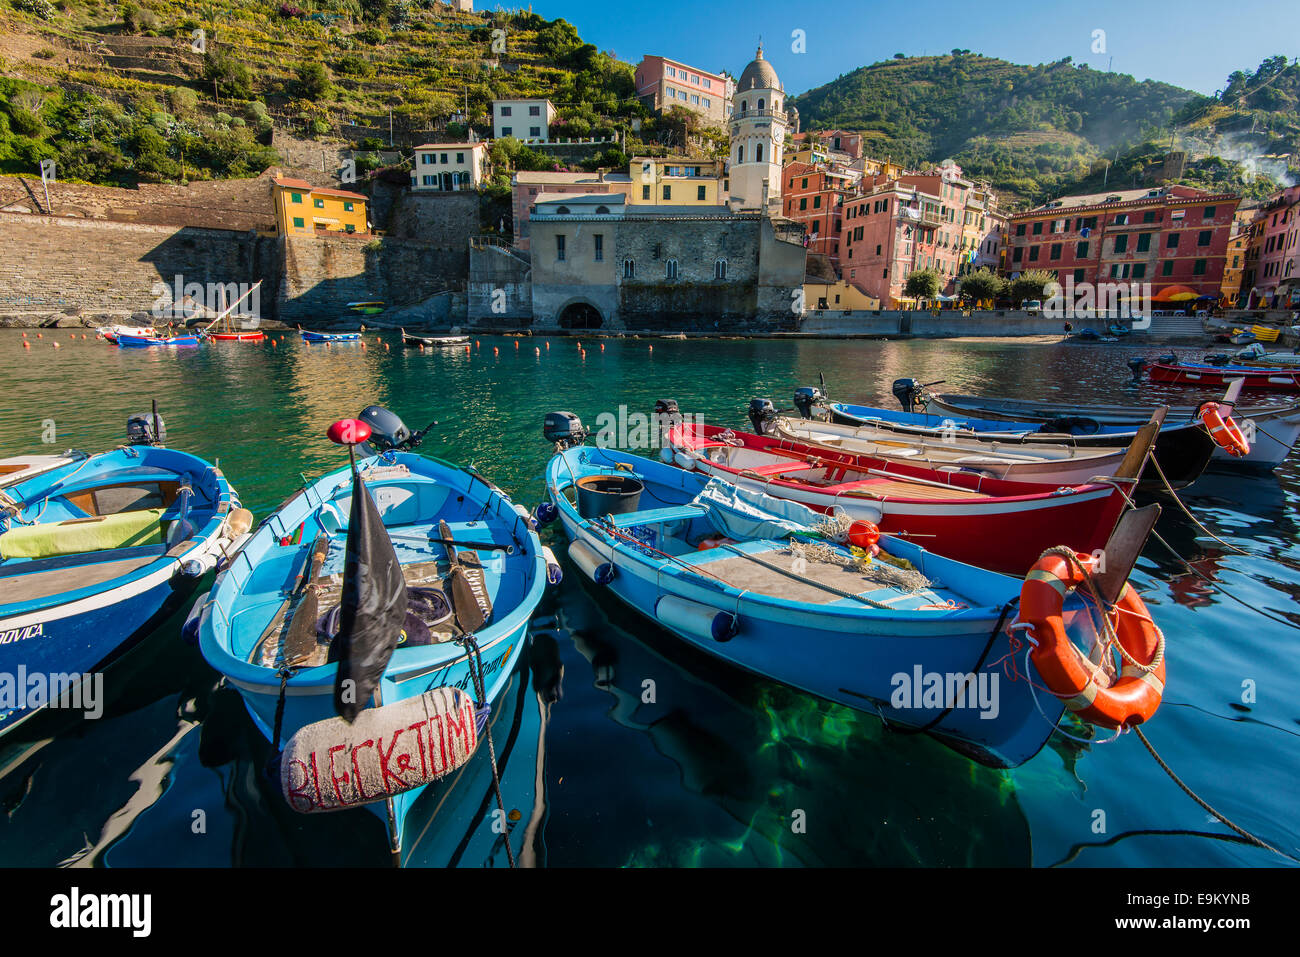 Moored fishing boats in the small port of Vernazza, Cinque Terre, Liguria, Italy Stock Photo